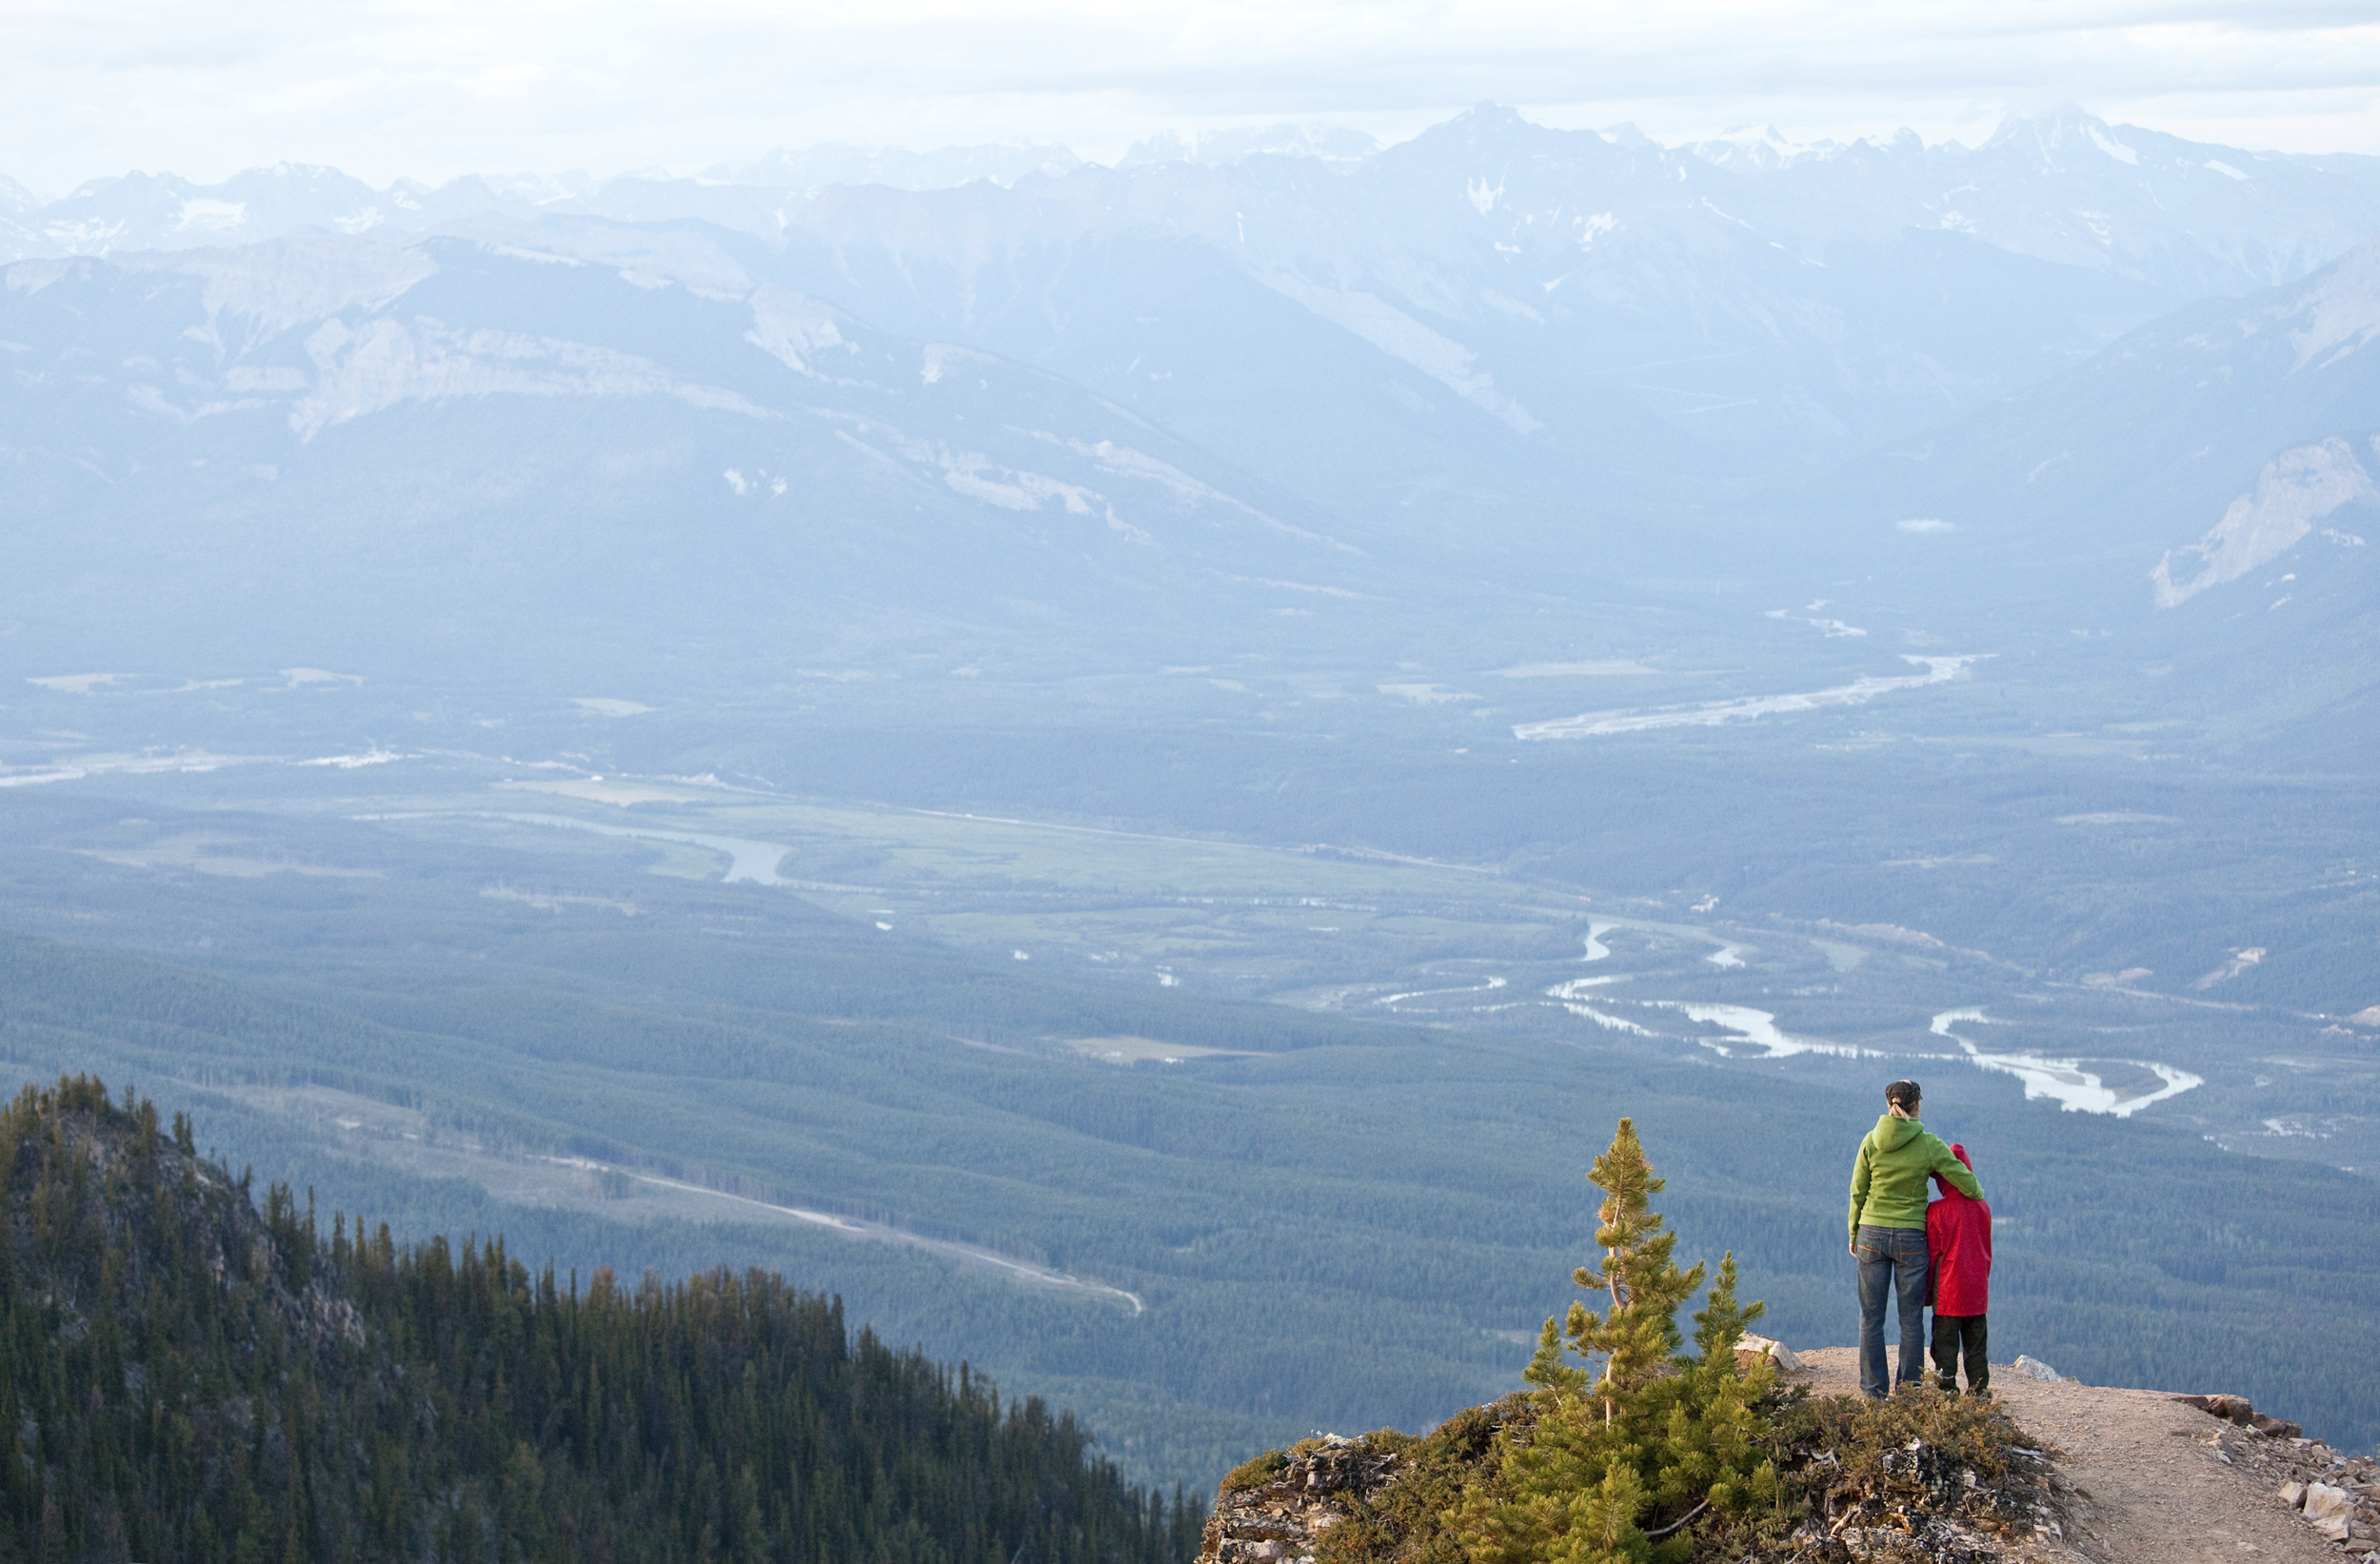 Get the Purcell Mountain Range and Selkirk Mountain Range all to yourself with a braincation at the Shorty Peak Fire Lookout, Idaho.